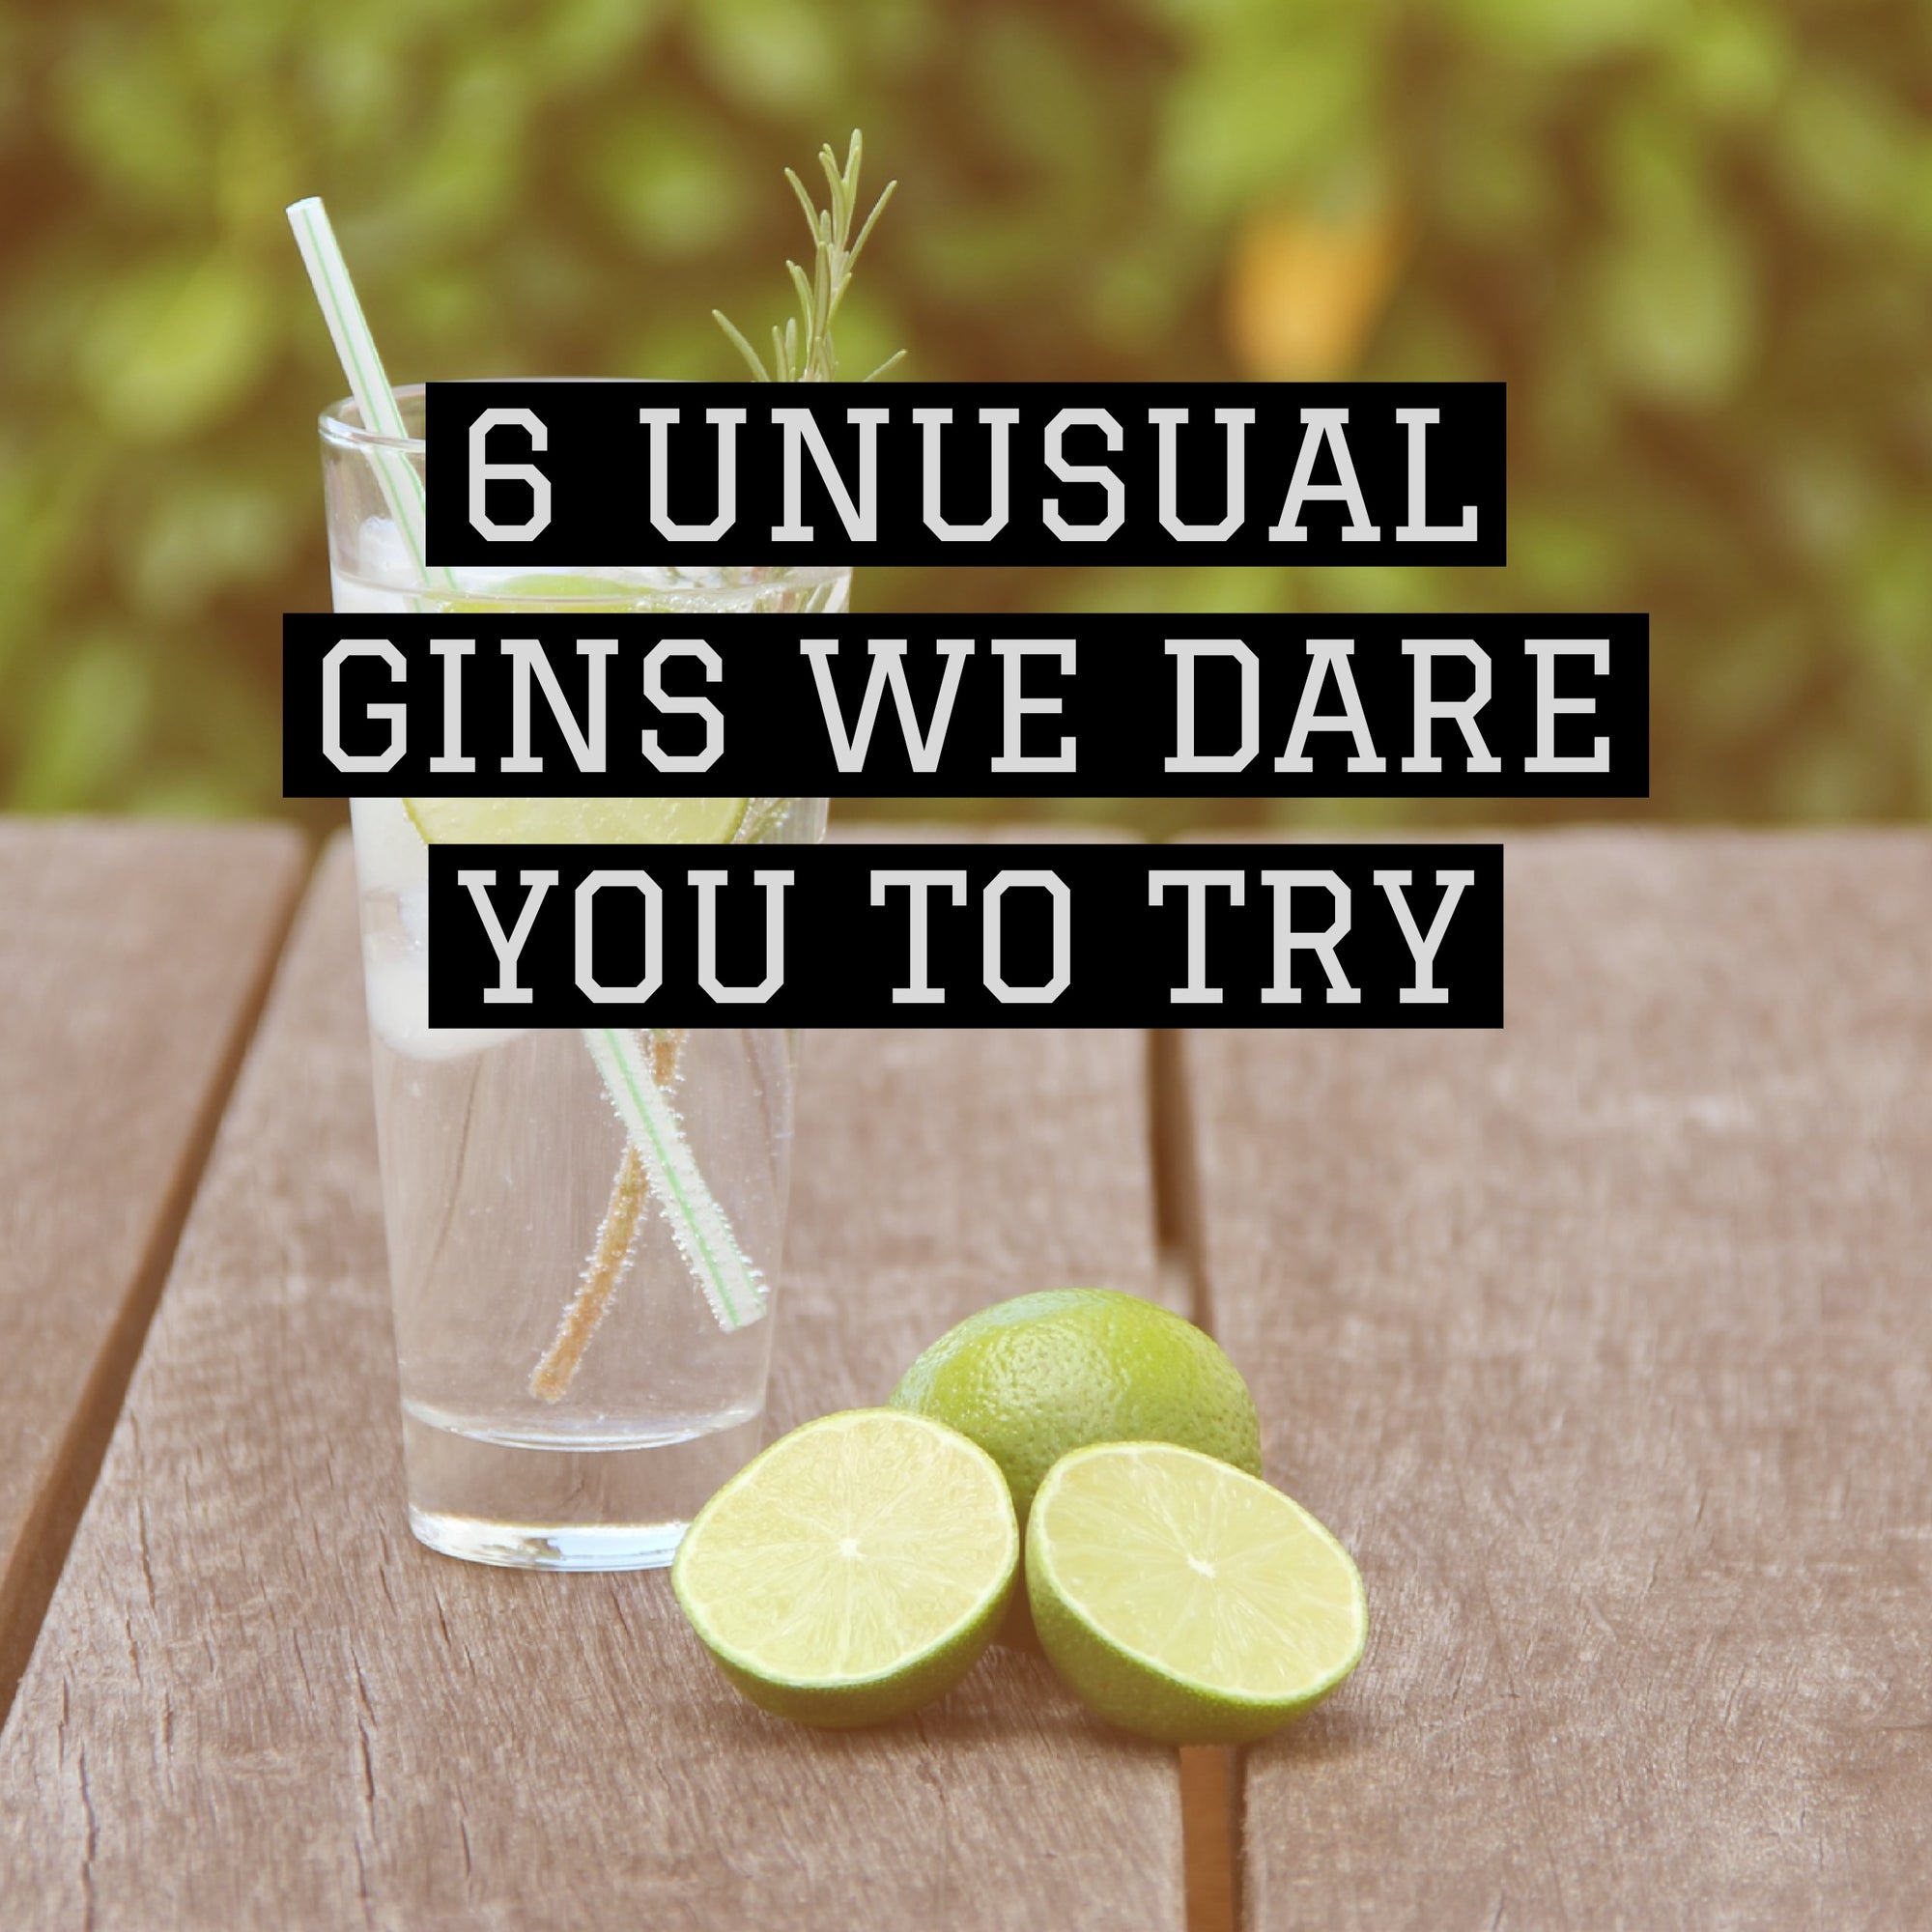 6 unusual gins we dare you to try